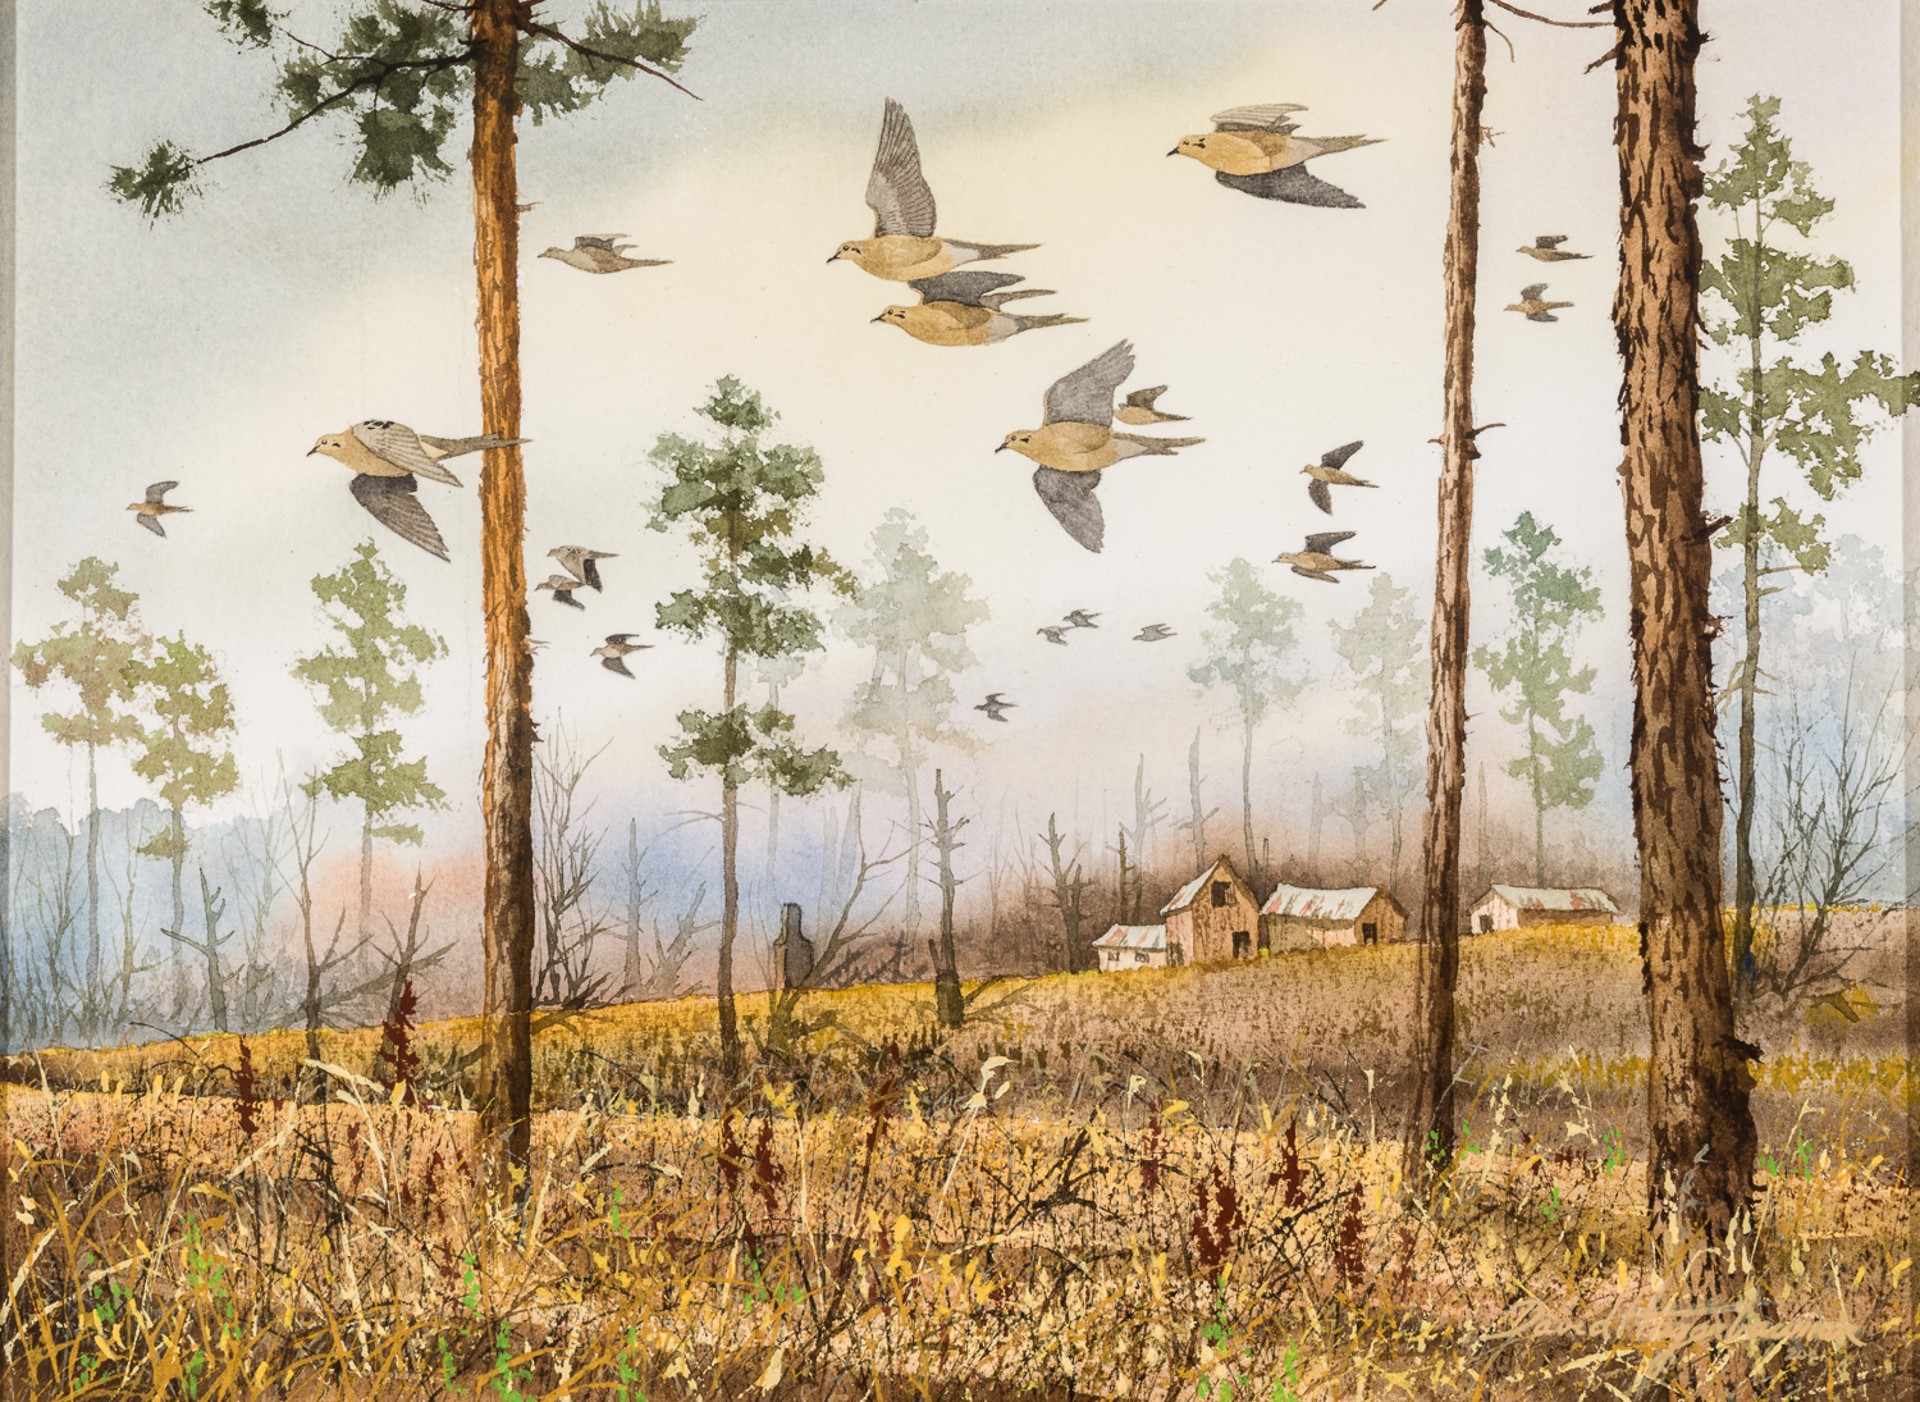 ‘THROUGH THE PINES,’ ‘GAMEBIRDS I,’ AND GAMEBIRDS II,’ (set of three) by David Hagerbaumer